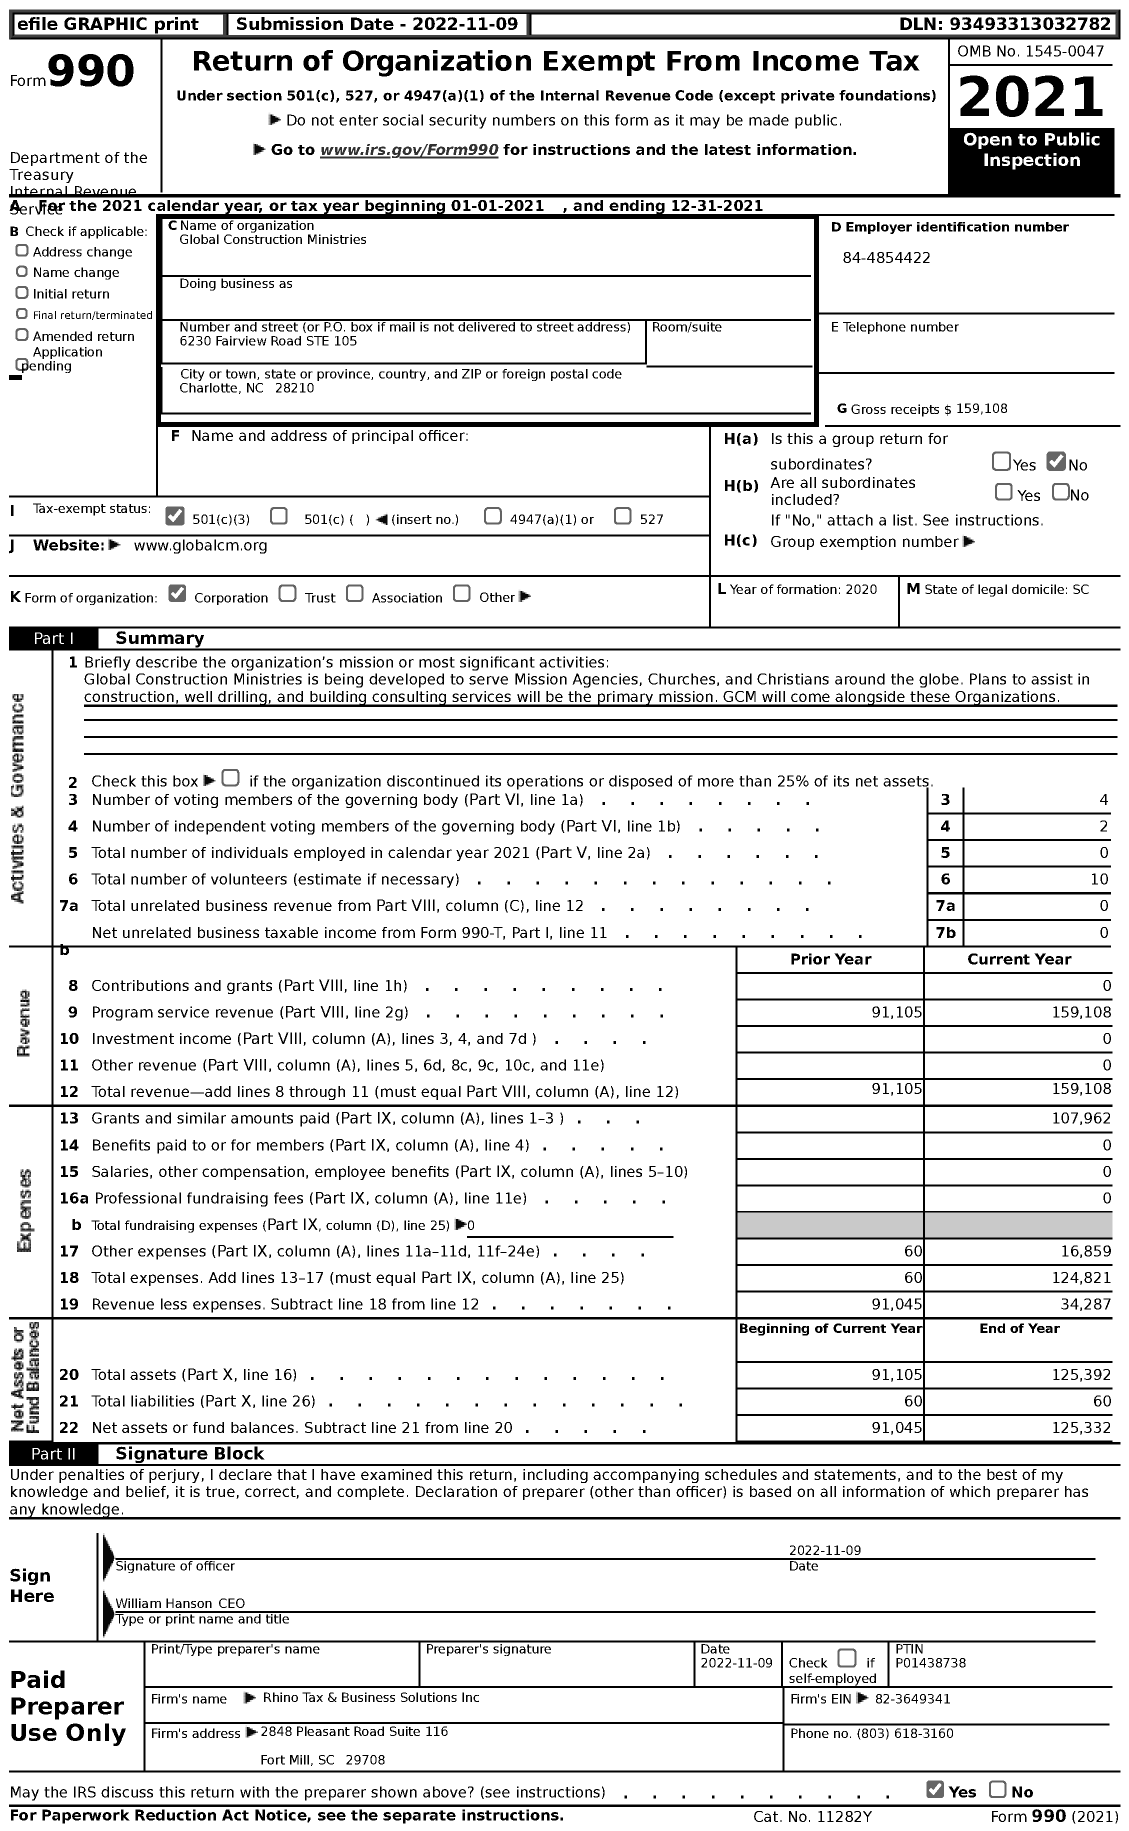 Image of first page of 2021 Form 990 for Global Construction Ministries